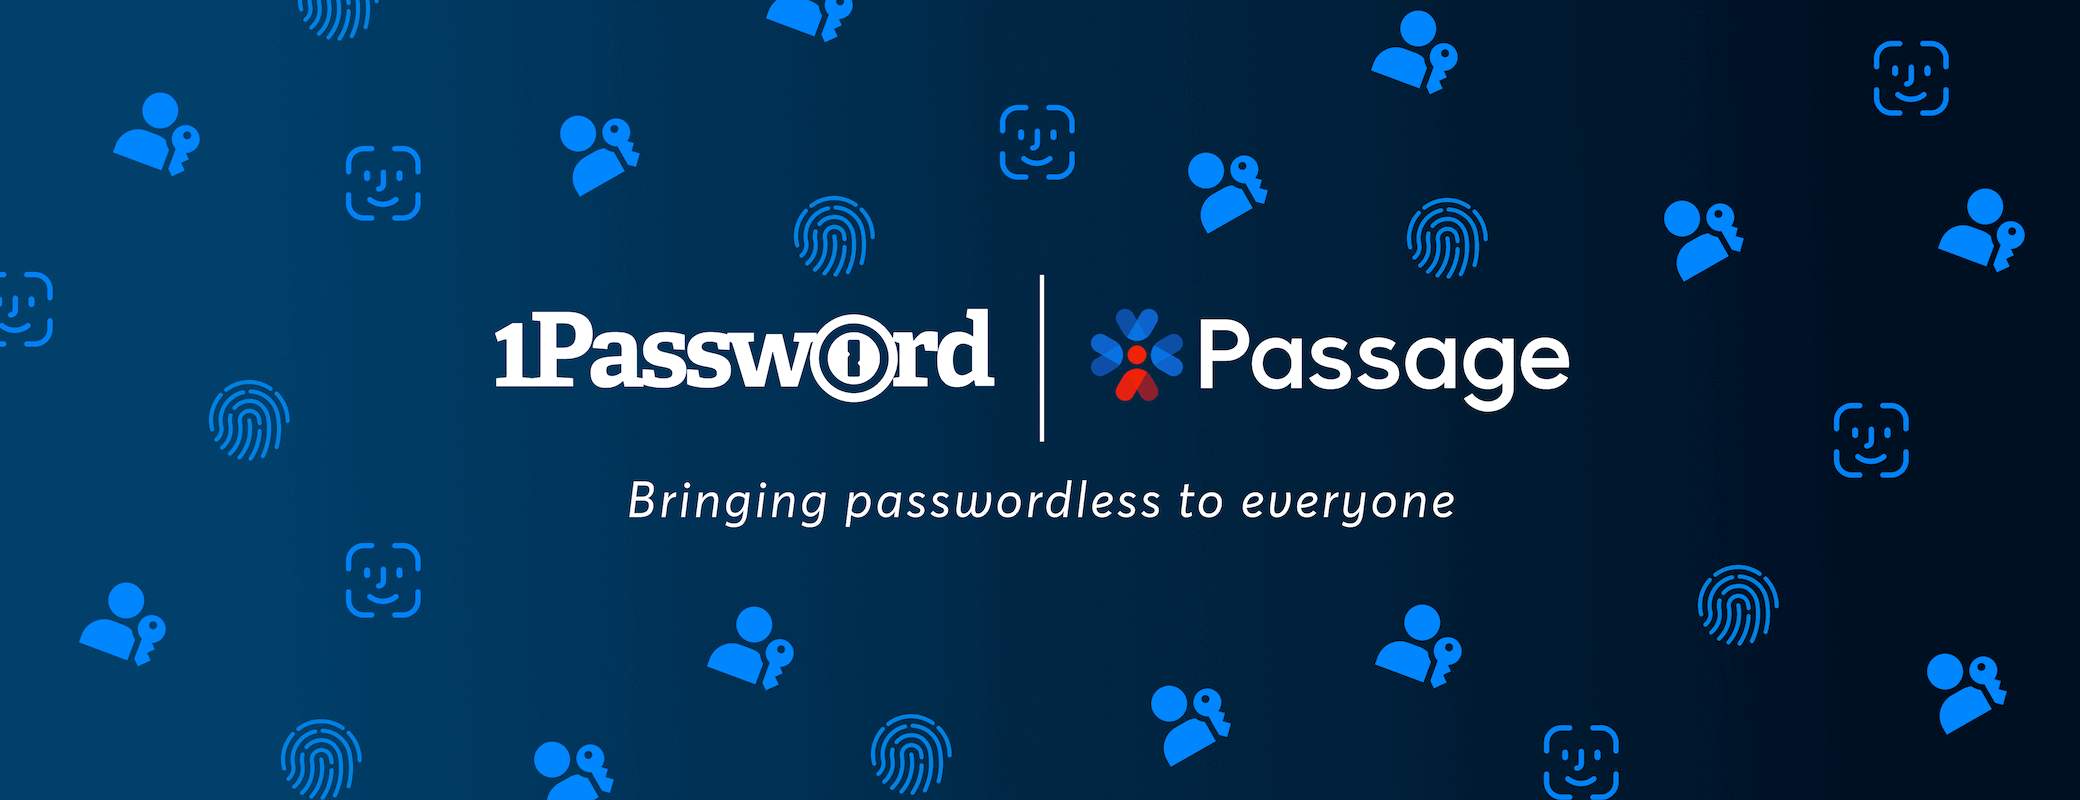 1Password acquires Passage to help bring passwordless authentication to everyone